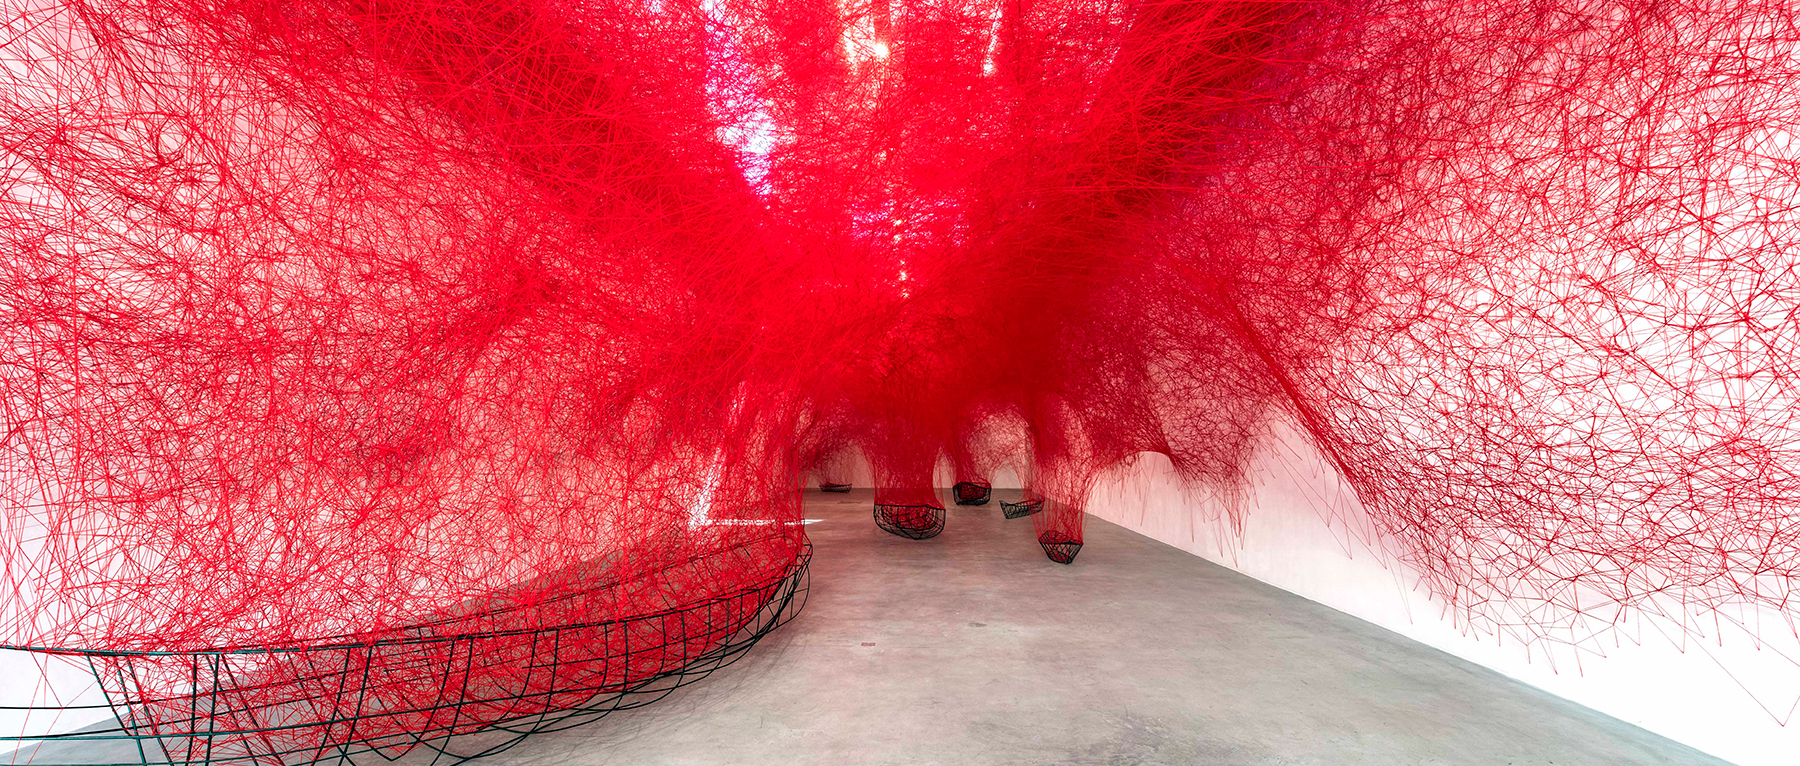 chiharu shiota tethers a labyrinth of red yarn to boat carcasses at blain|southern